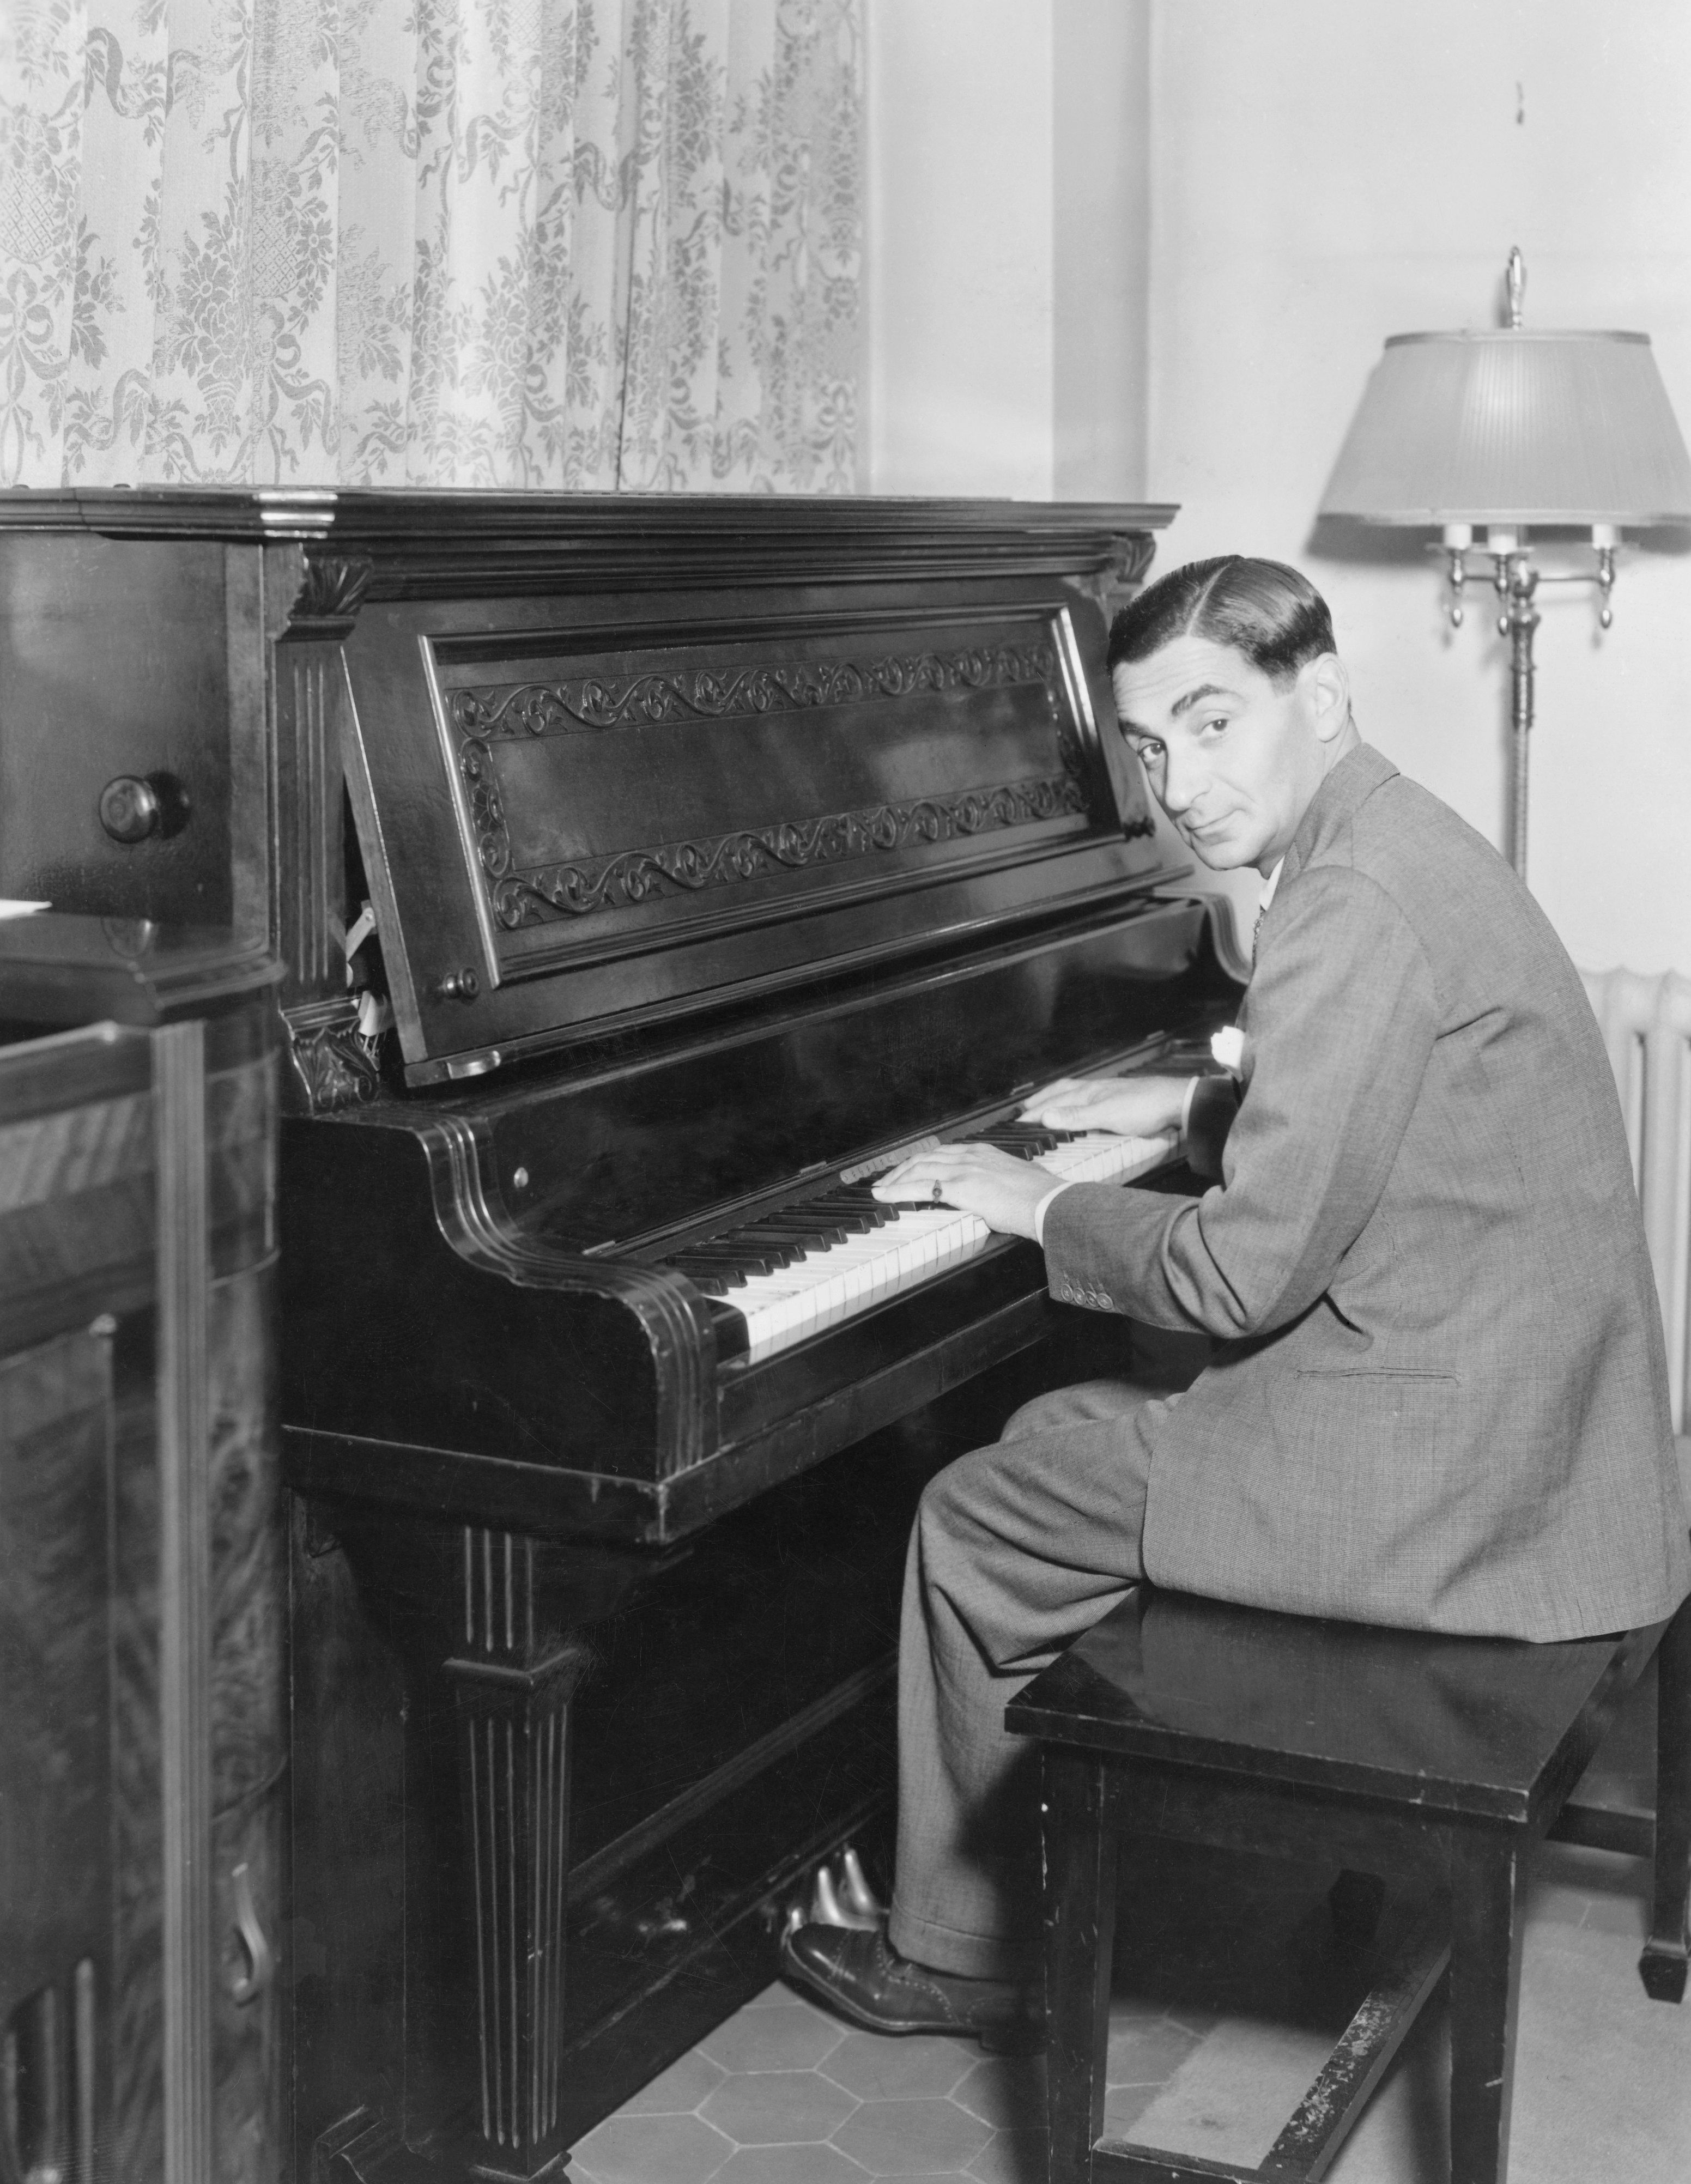 A black and white photograph of a man in a suit sitting at an upright piano.